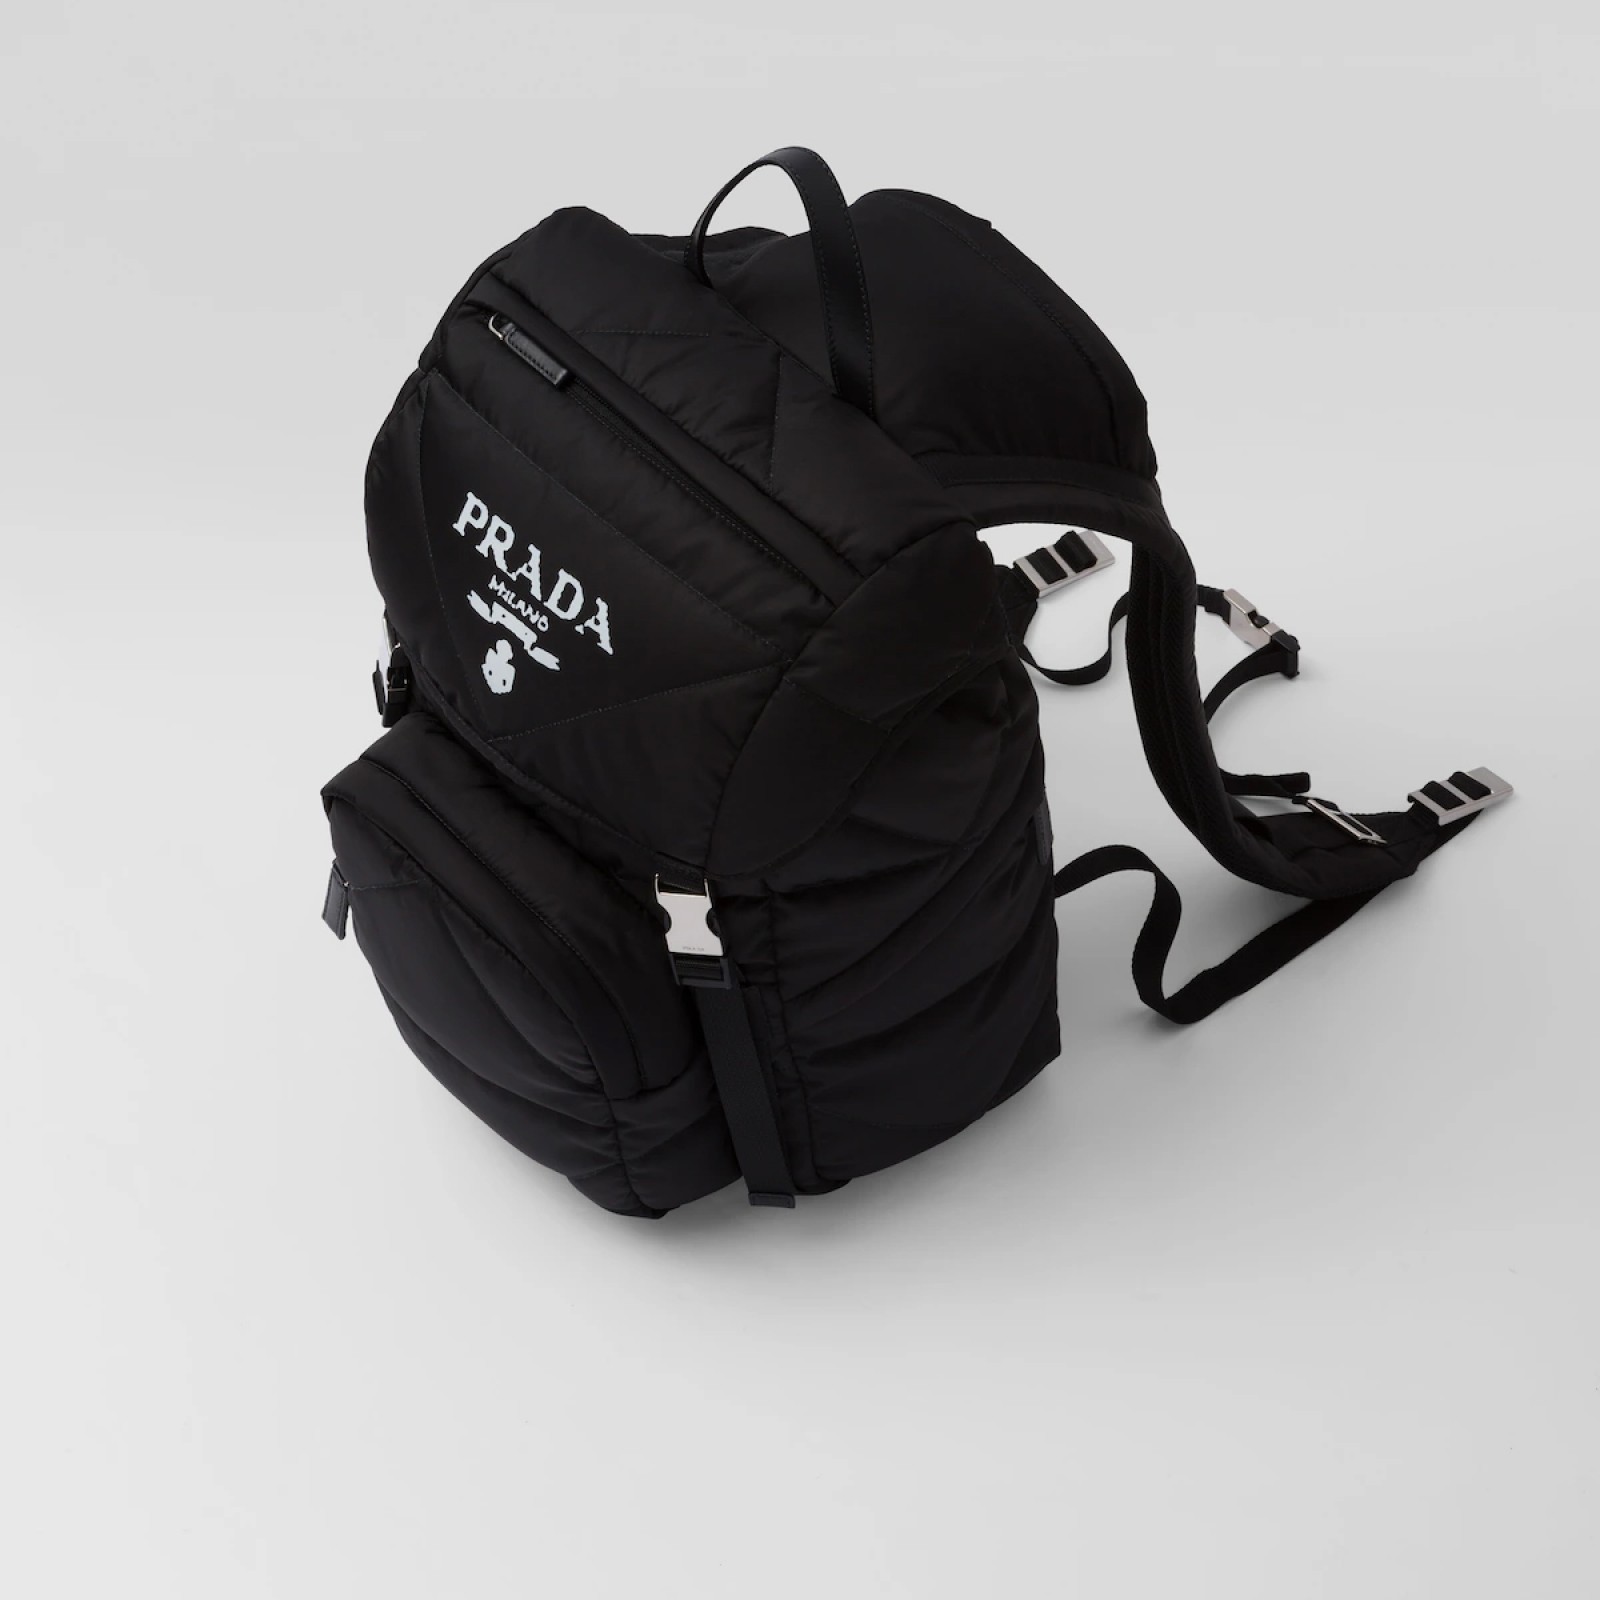 Re-Nylon padded backpack with hood